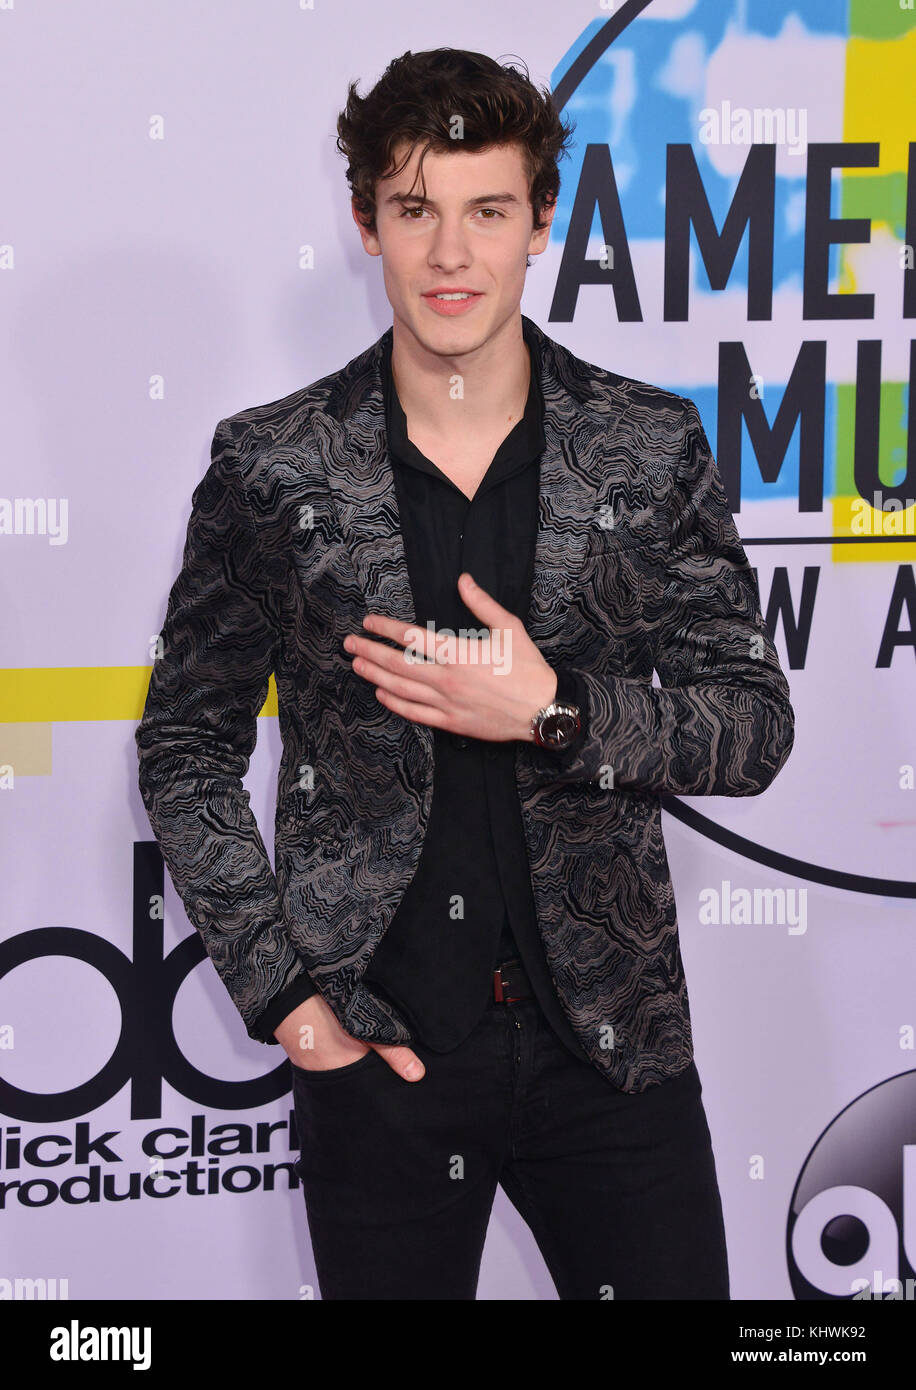 Los Angeles, USA. 19th Nov, 2017. Shawn Mendes 290 arrives at the 2017 American Music Awards at Microsoft Theater on November 19, 2017 in Los Angeles, California Credit: Tsuni/USA/Alamy Live News Stock Photo